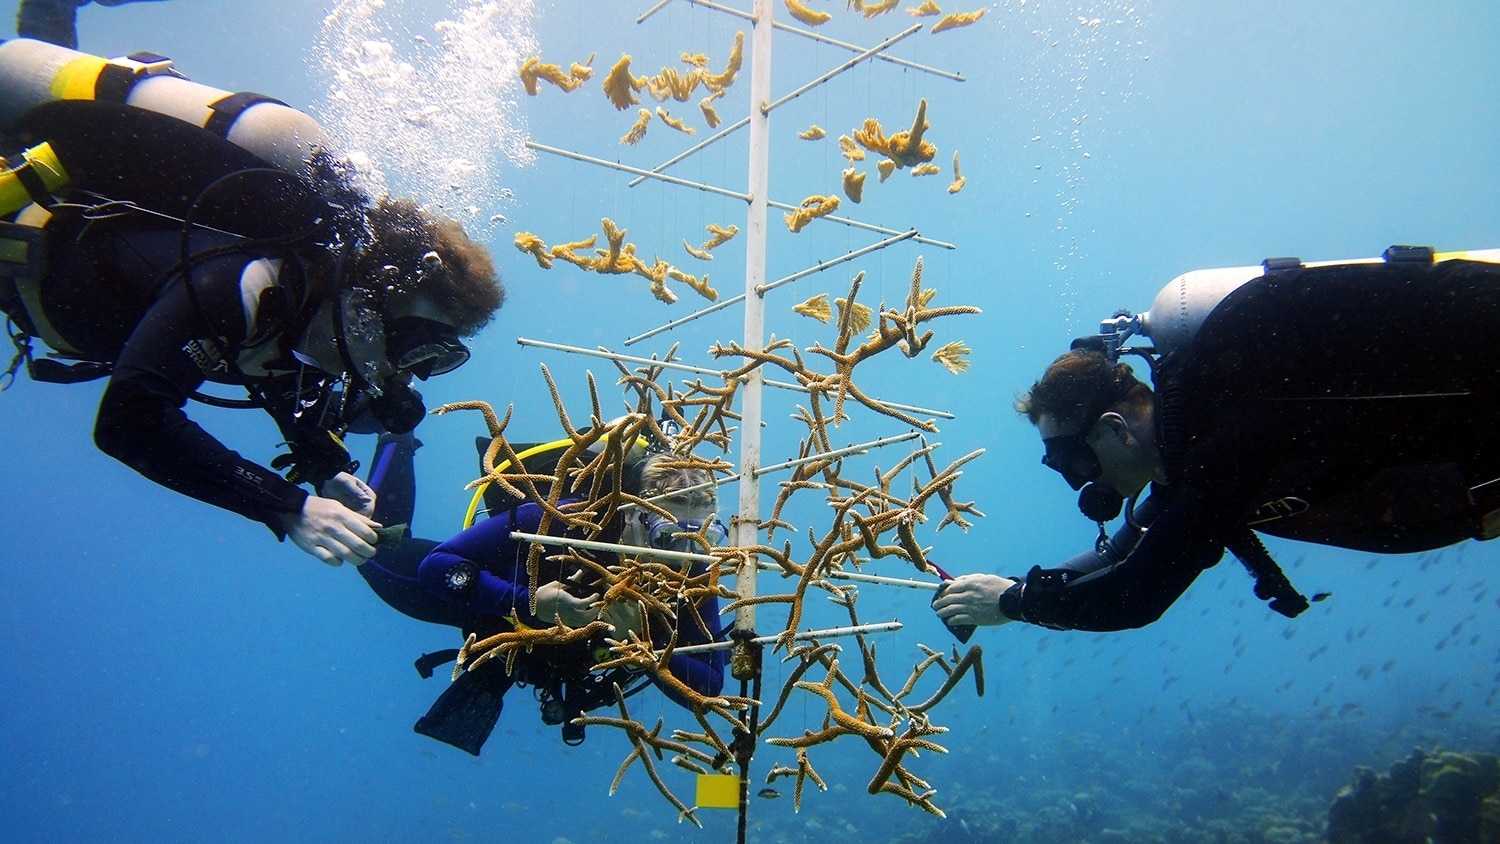 Three divers are underwater. One is reaching downward from the left, one is reaching downward from the right. The third diver is reaching outward from the center of the image, facing the camera between the two other divers. In the center is a metal pole with extending metal branches. Young coral in spiky formations of yellow, orange and brown is being hung by the divers.